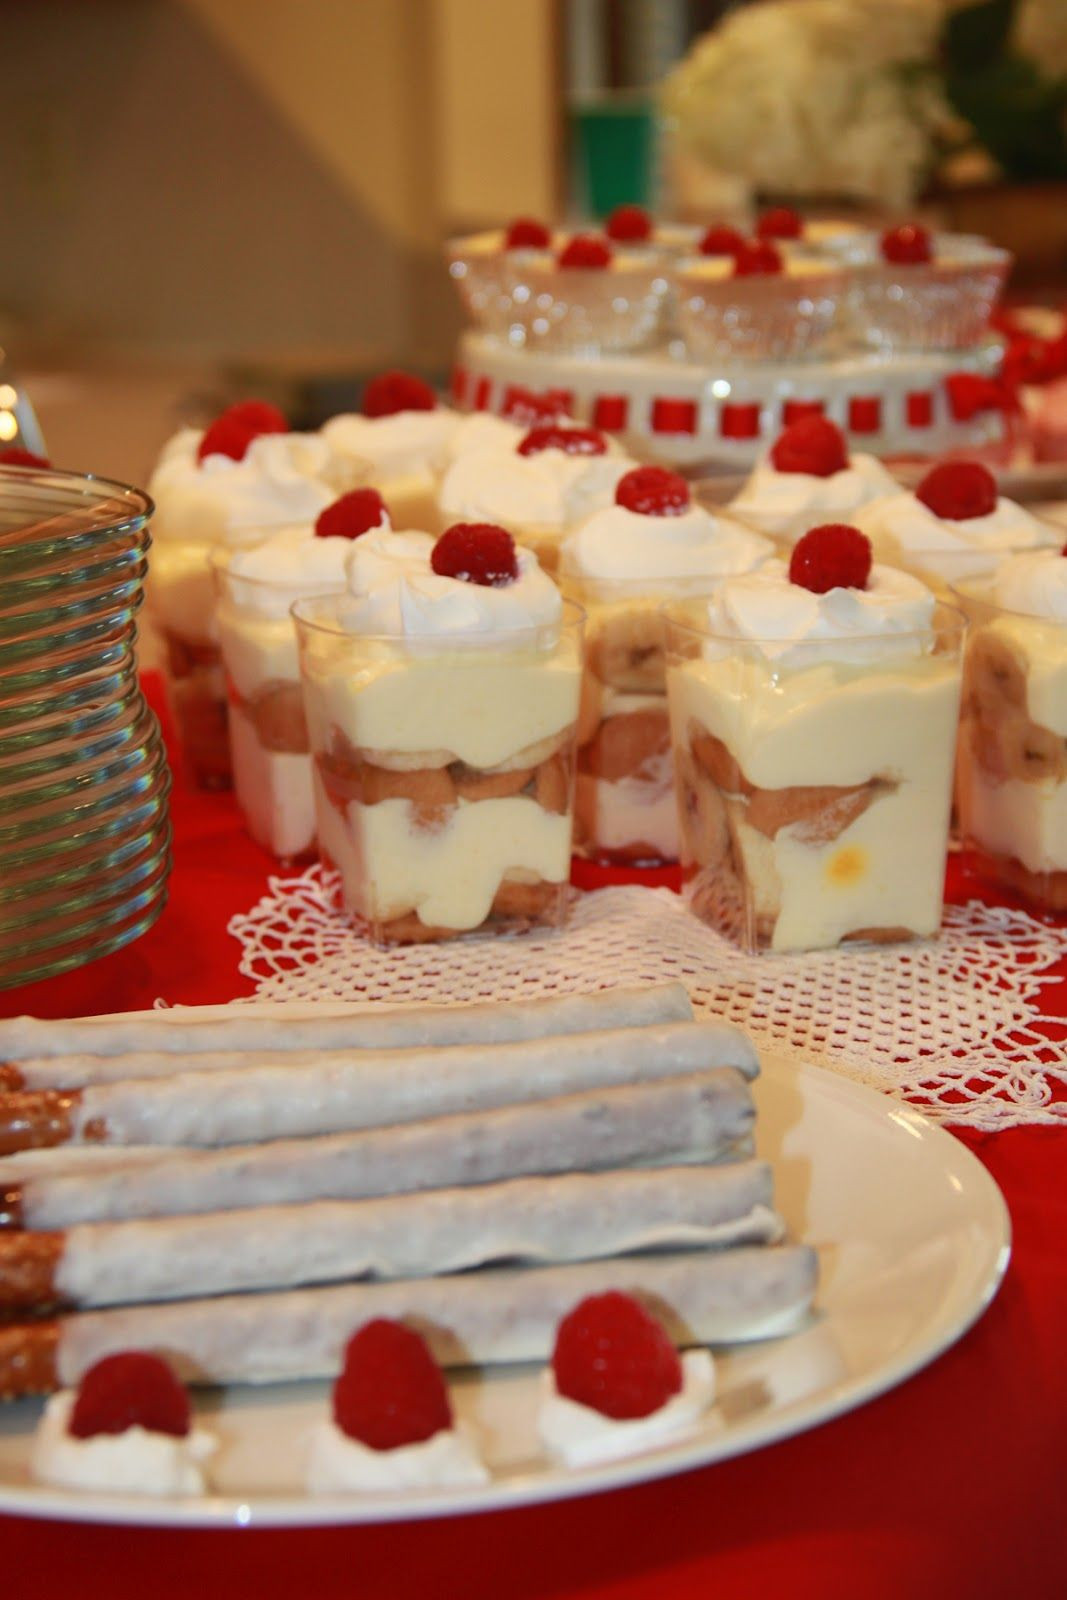 Bridal Shower Desserts
 Red and White Bridal Shower designed by Lucky Penny Events